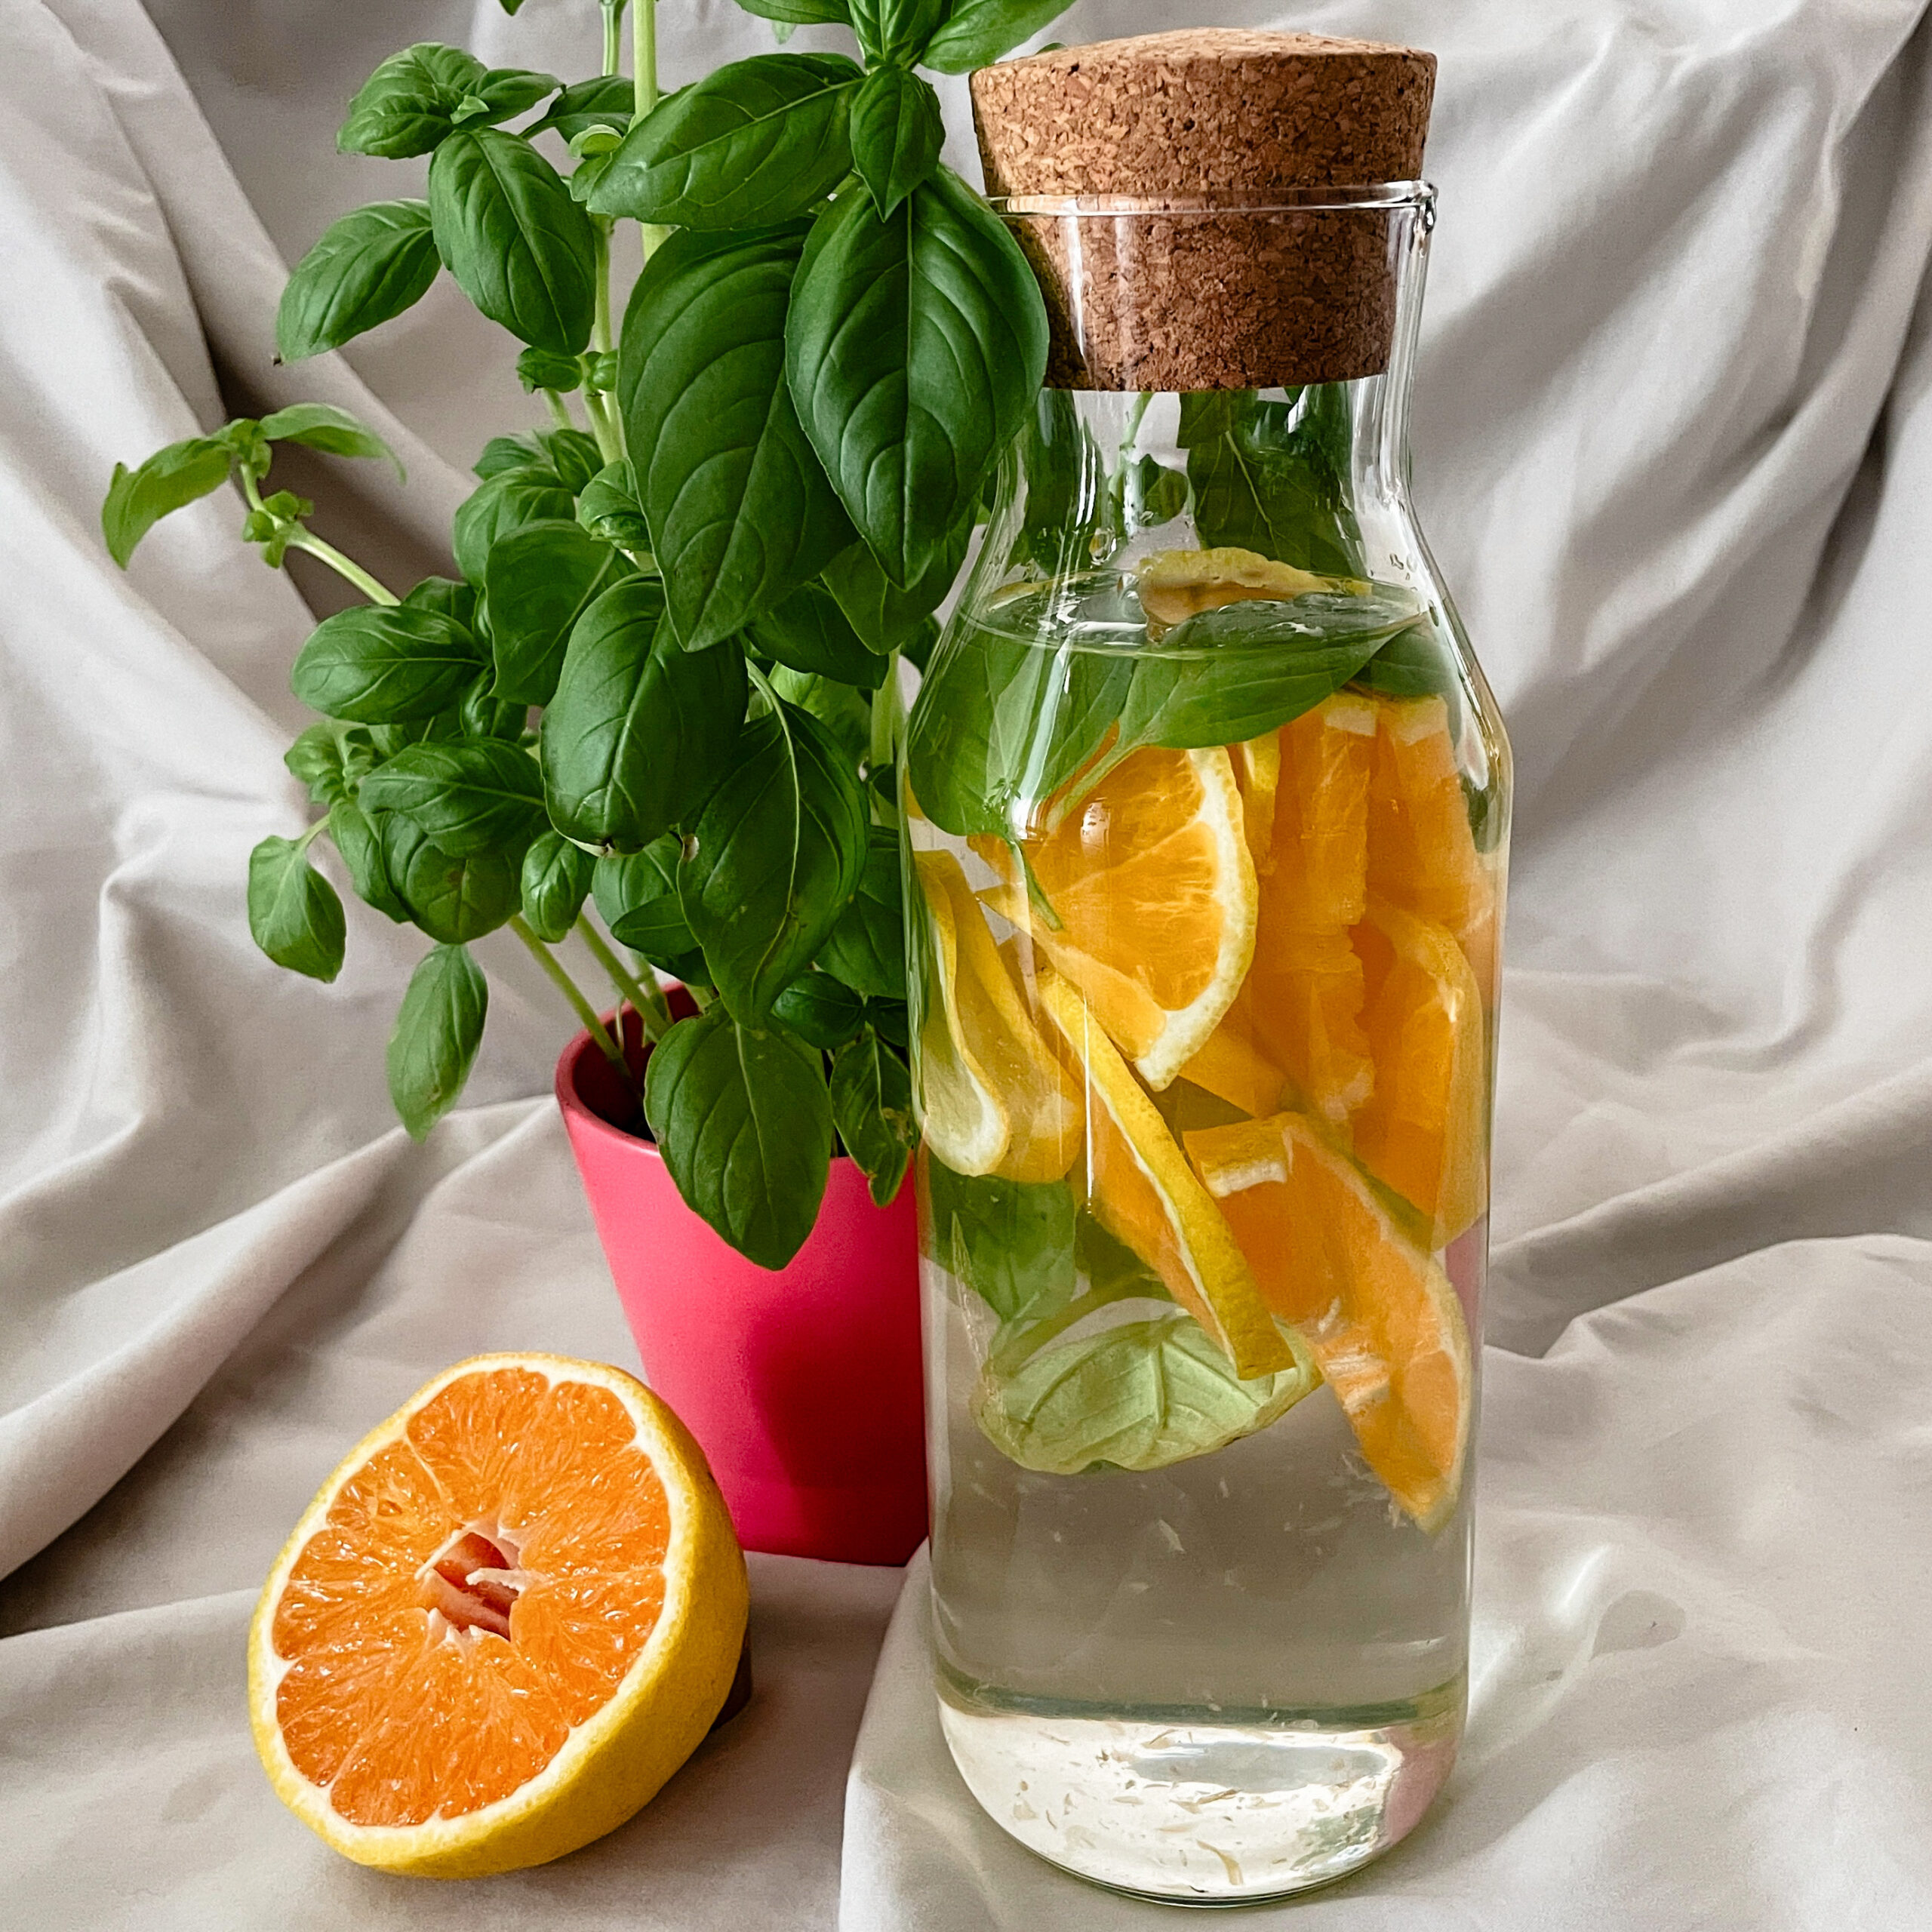 444529F2 5082 407C BA36 06A37162F1B9 scaled - Freshness and fruit infused water for the end of summer (express)